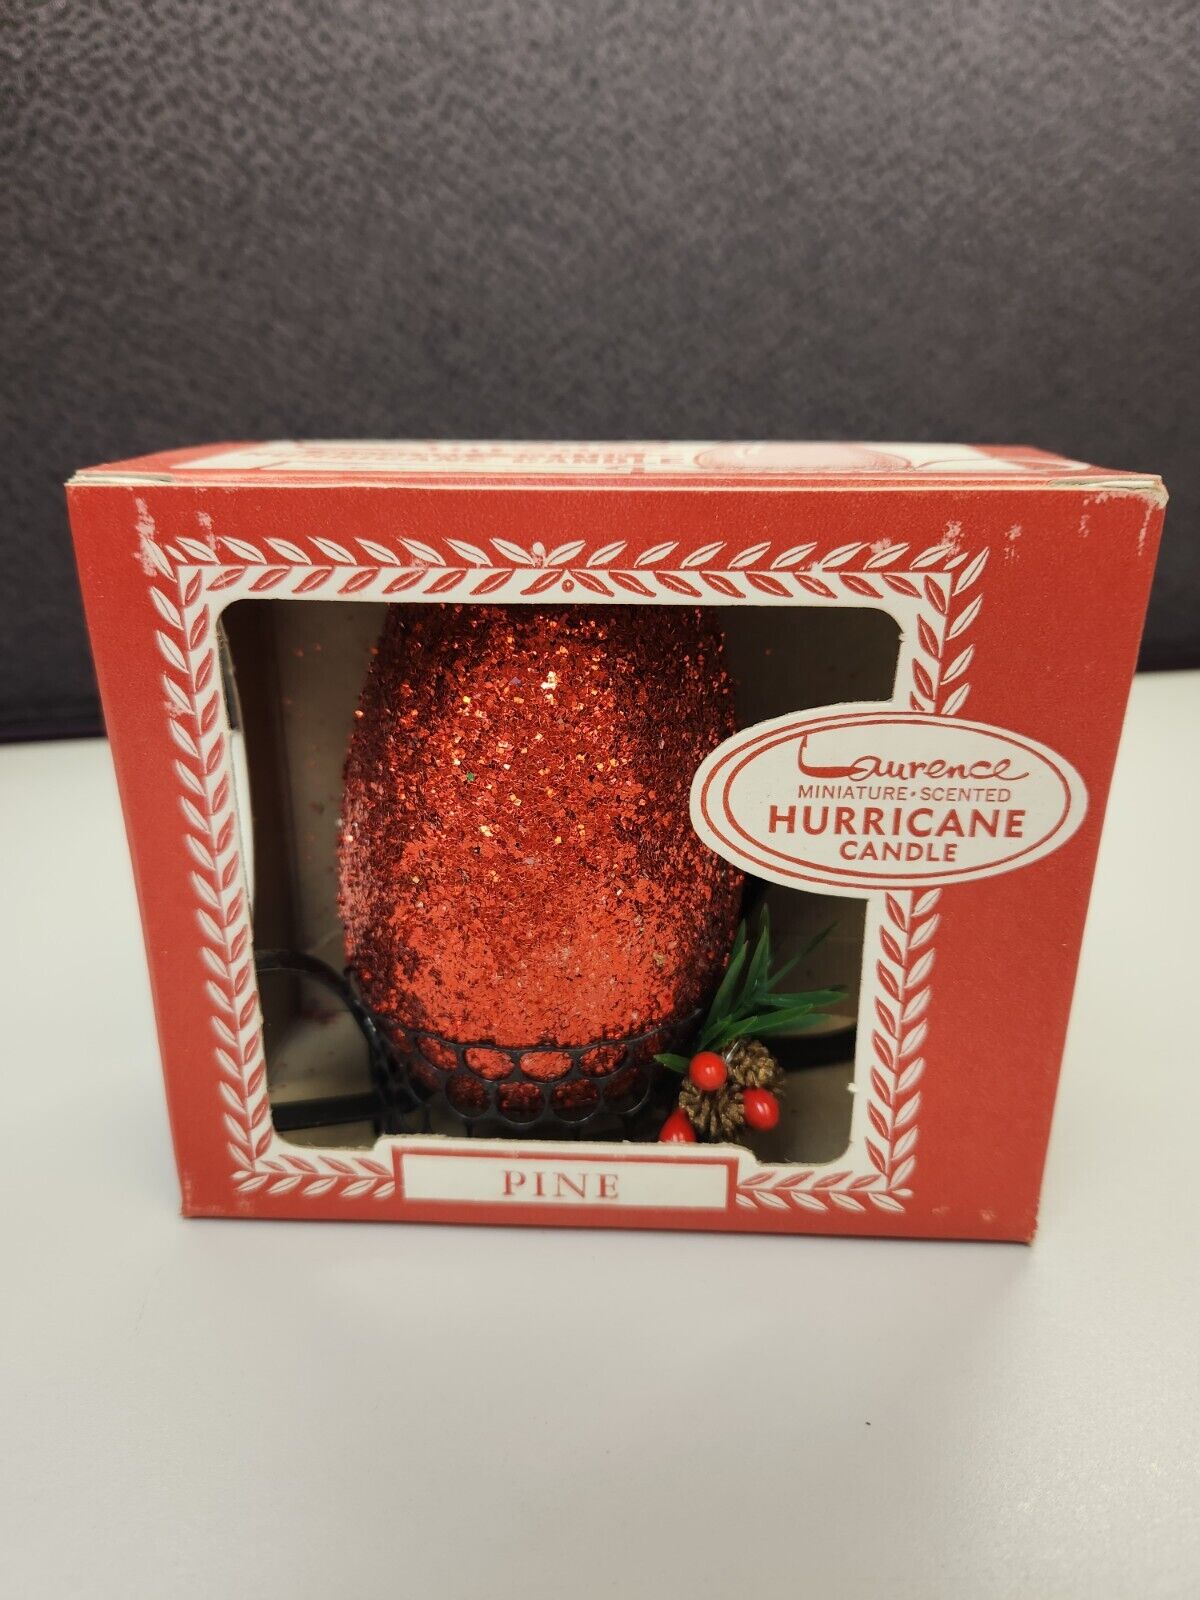 Vintage Laurence Miniature Red Pine Hurricane Candle Boxed Glitter W/Box